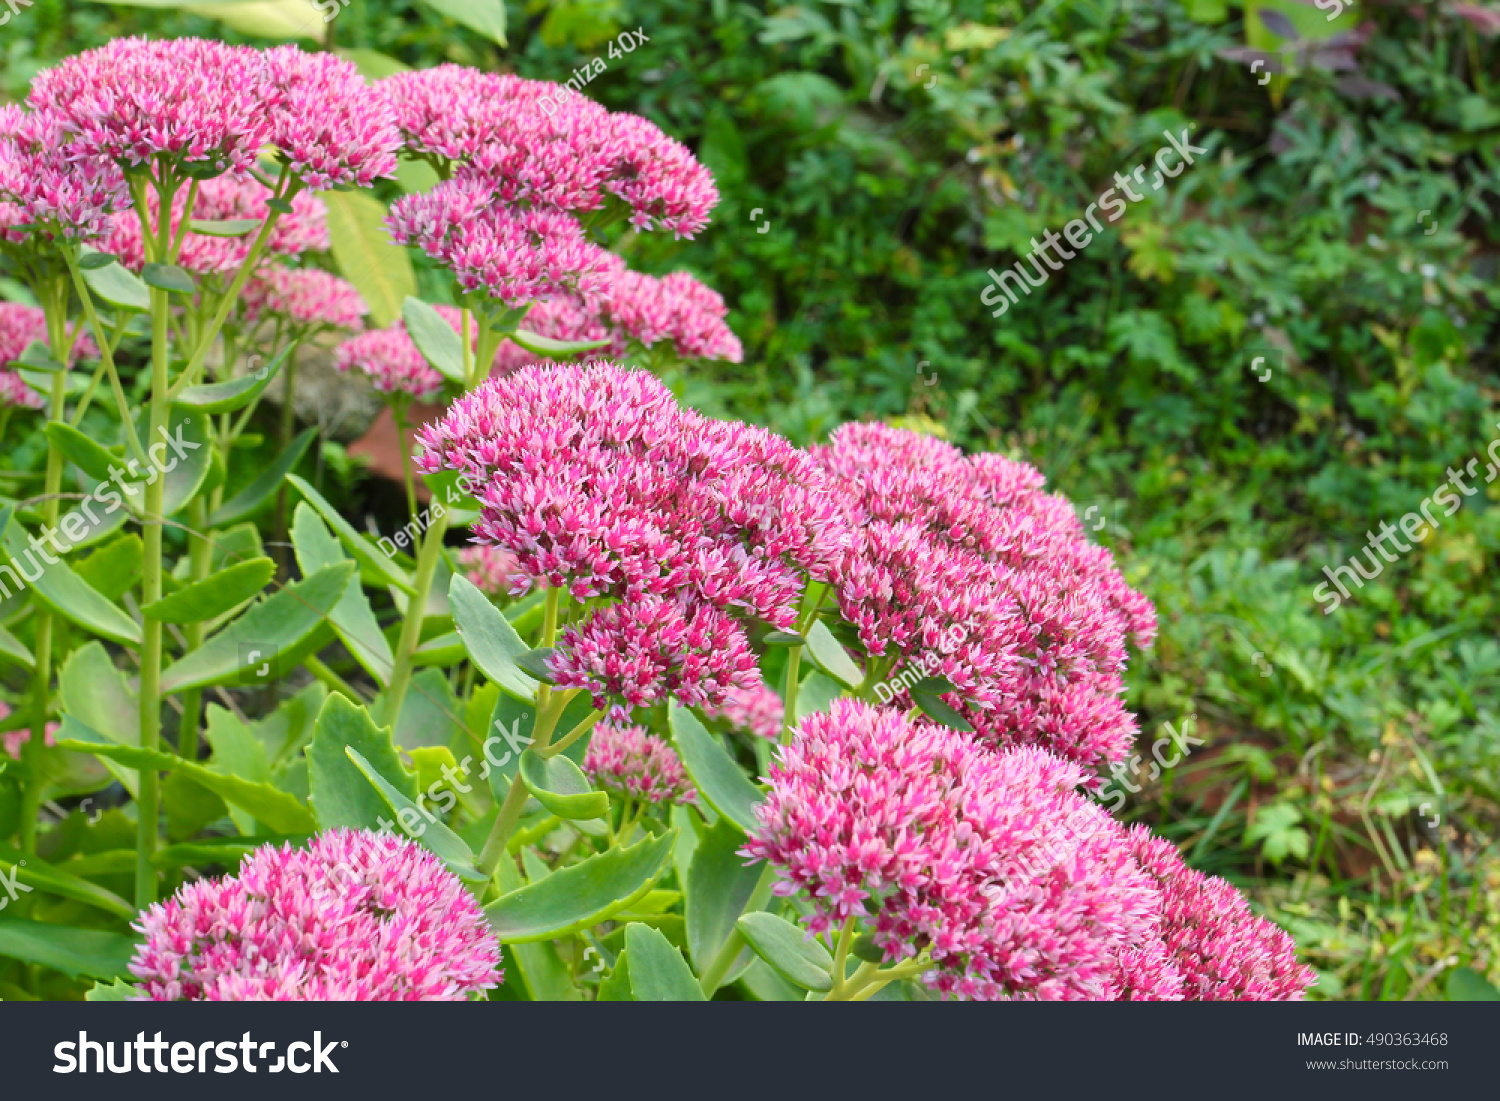 Bush Pink Orpine Flowers Known Stonecrop Nature Stock Image 490363468